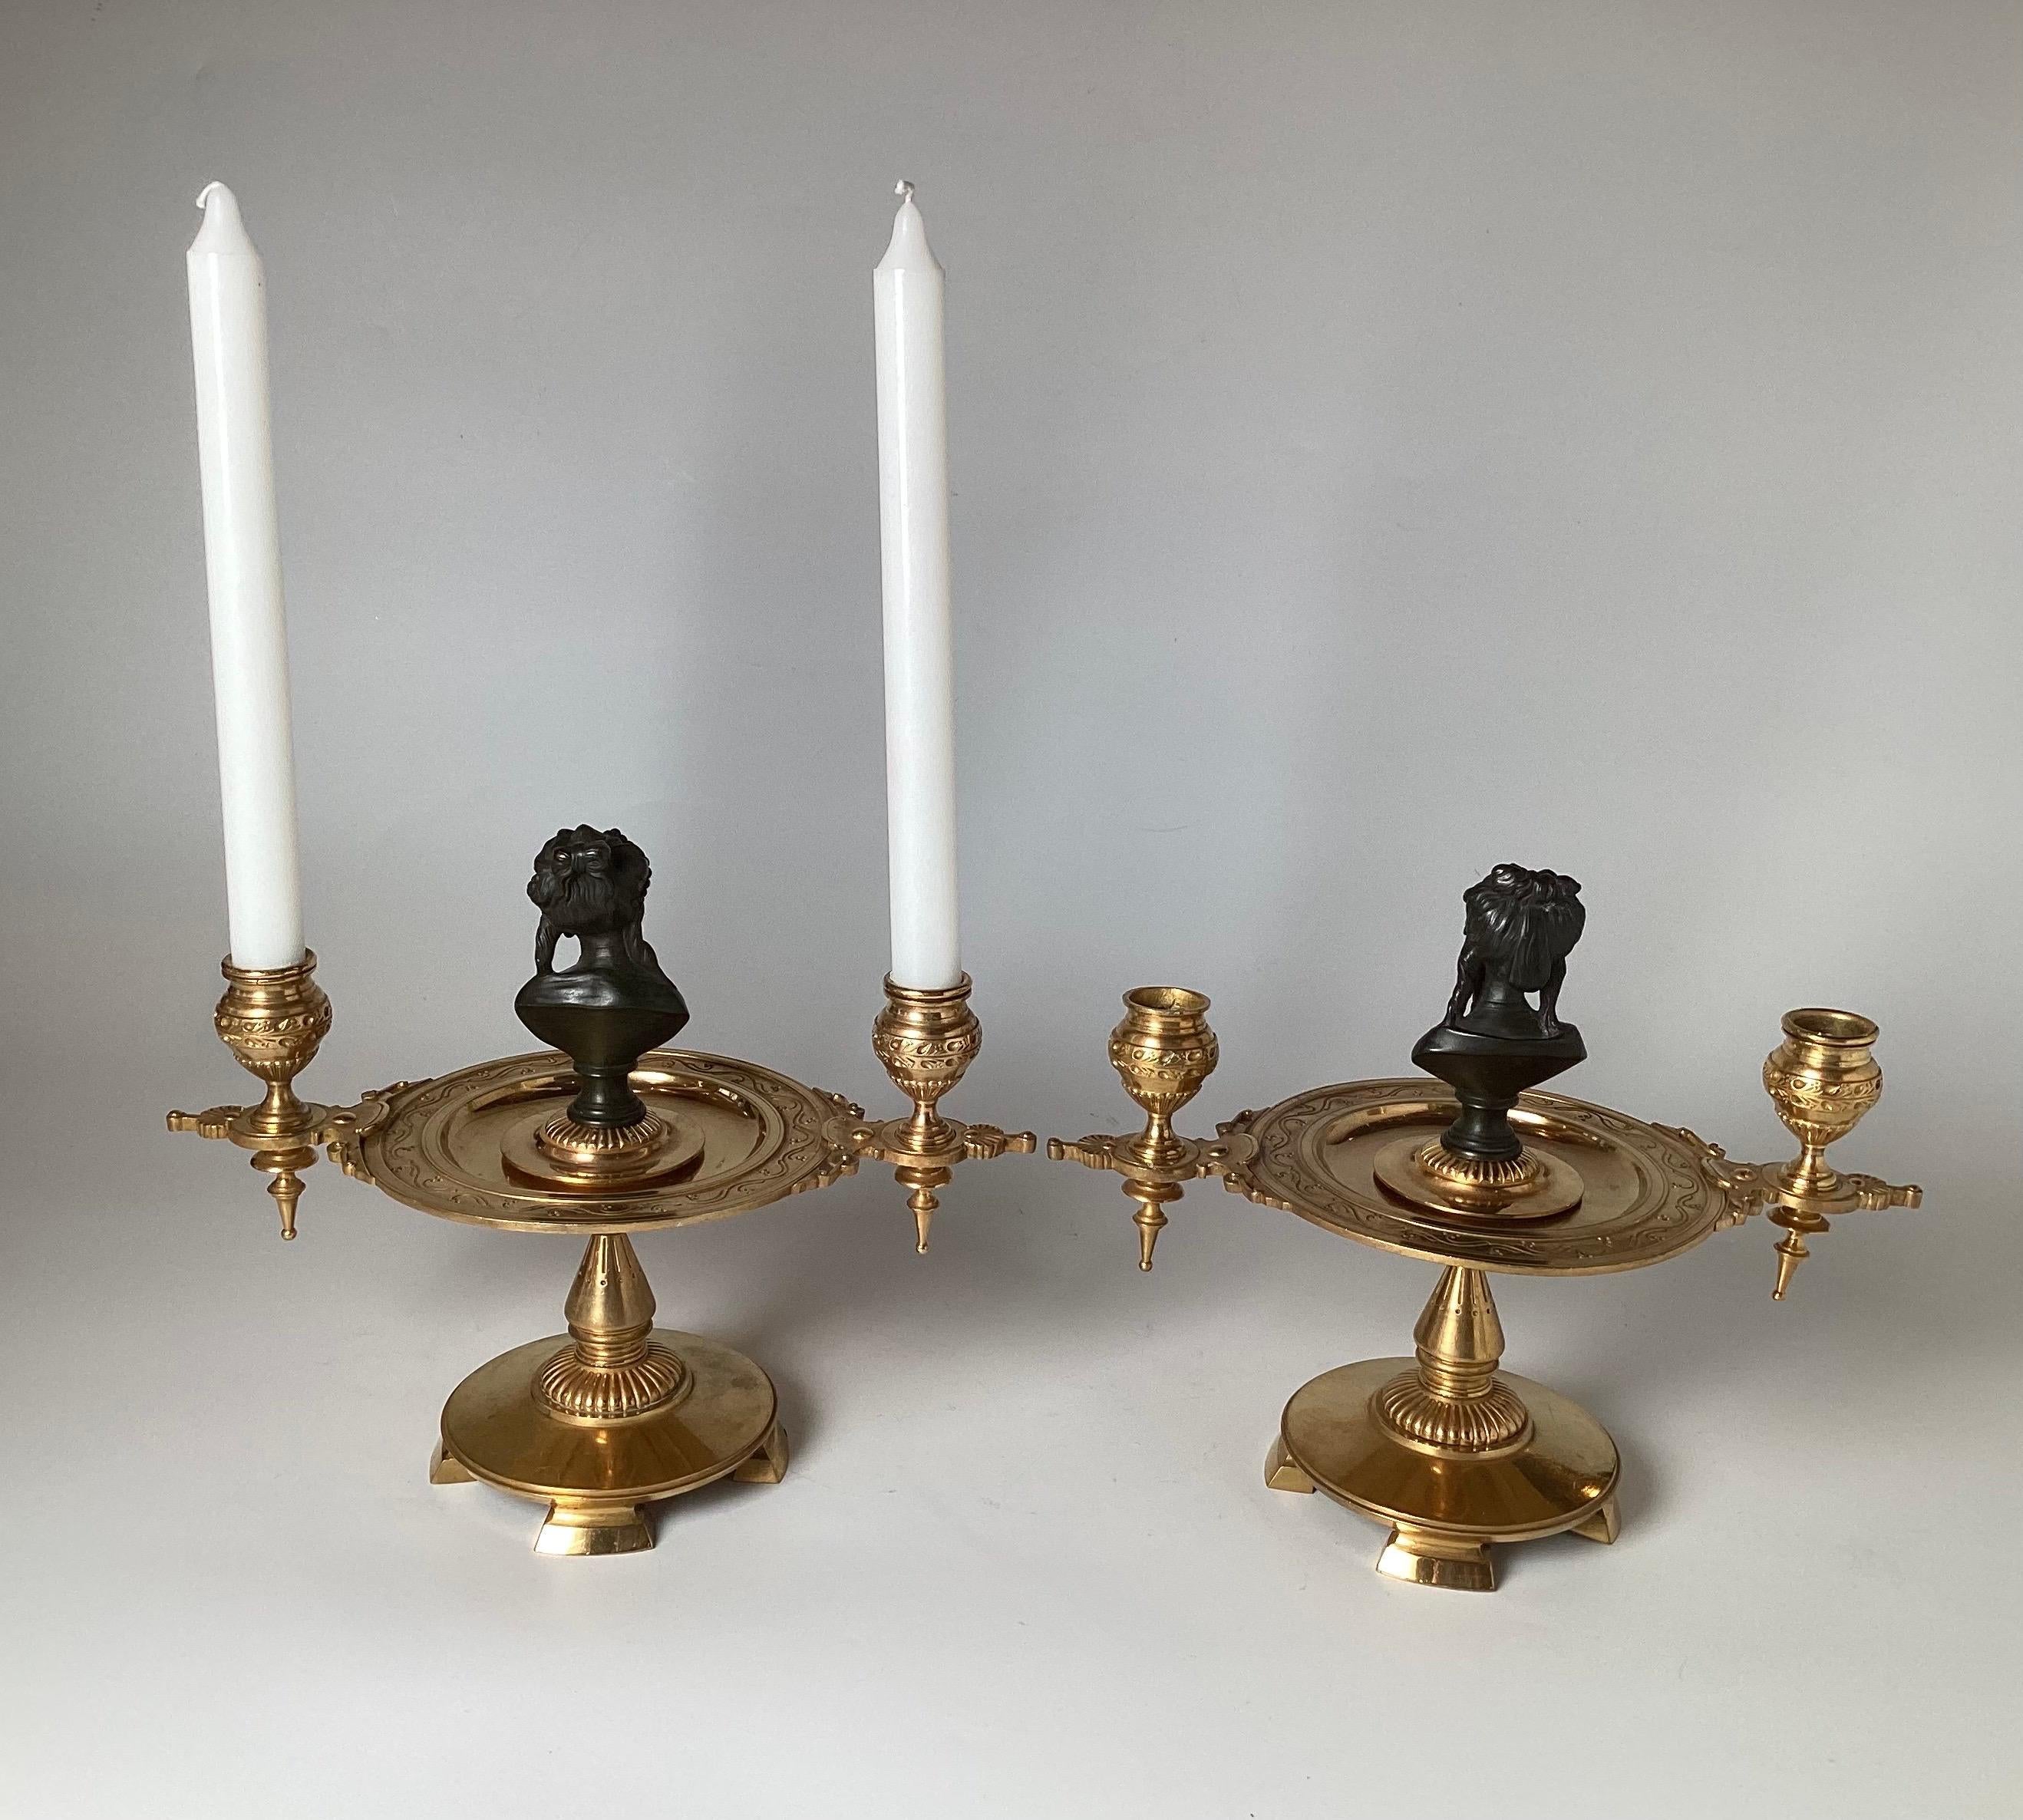 An elegant pair of antique French, guilt and patinated bronze figure candelabra from the 1870s the pair with two different patinated bronze bust centers with the rest in its brilliant original gilt finish.   9.5 inches tall, 11.5 inches wide.  The